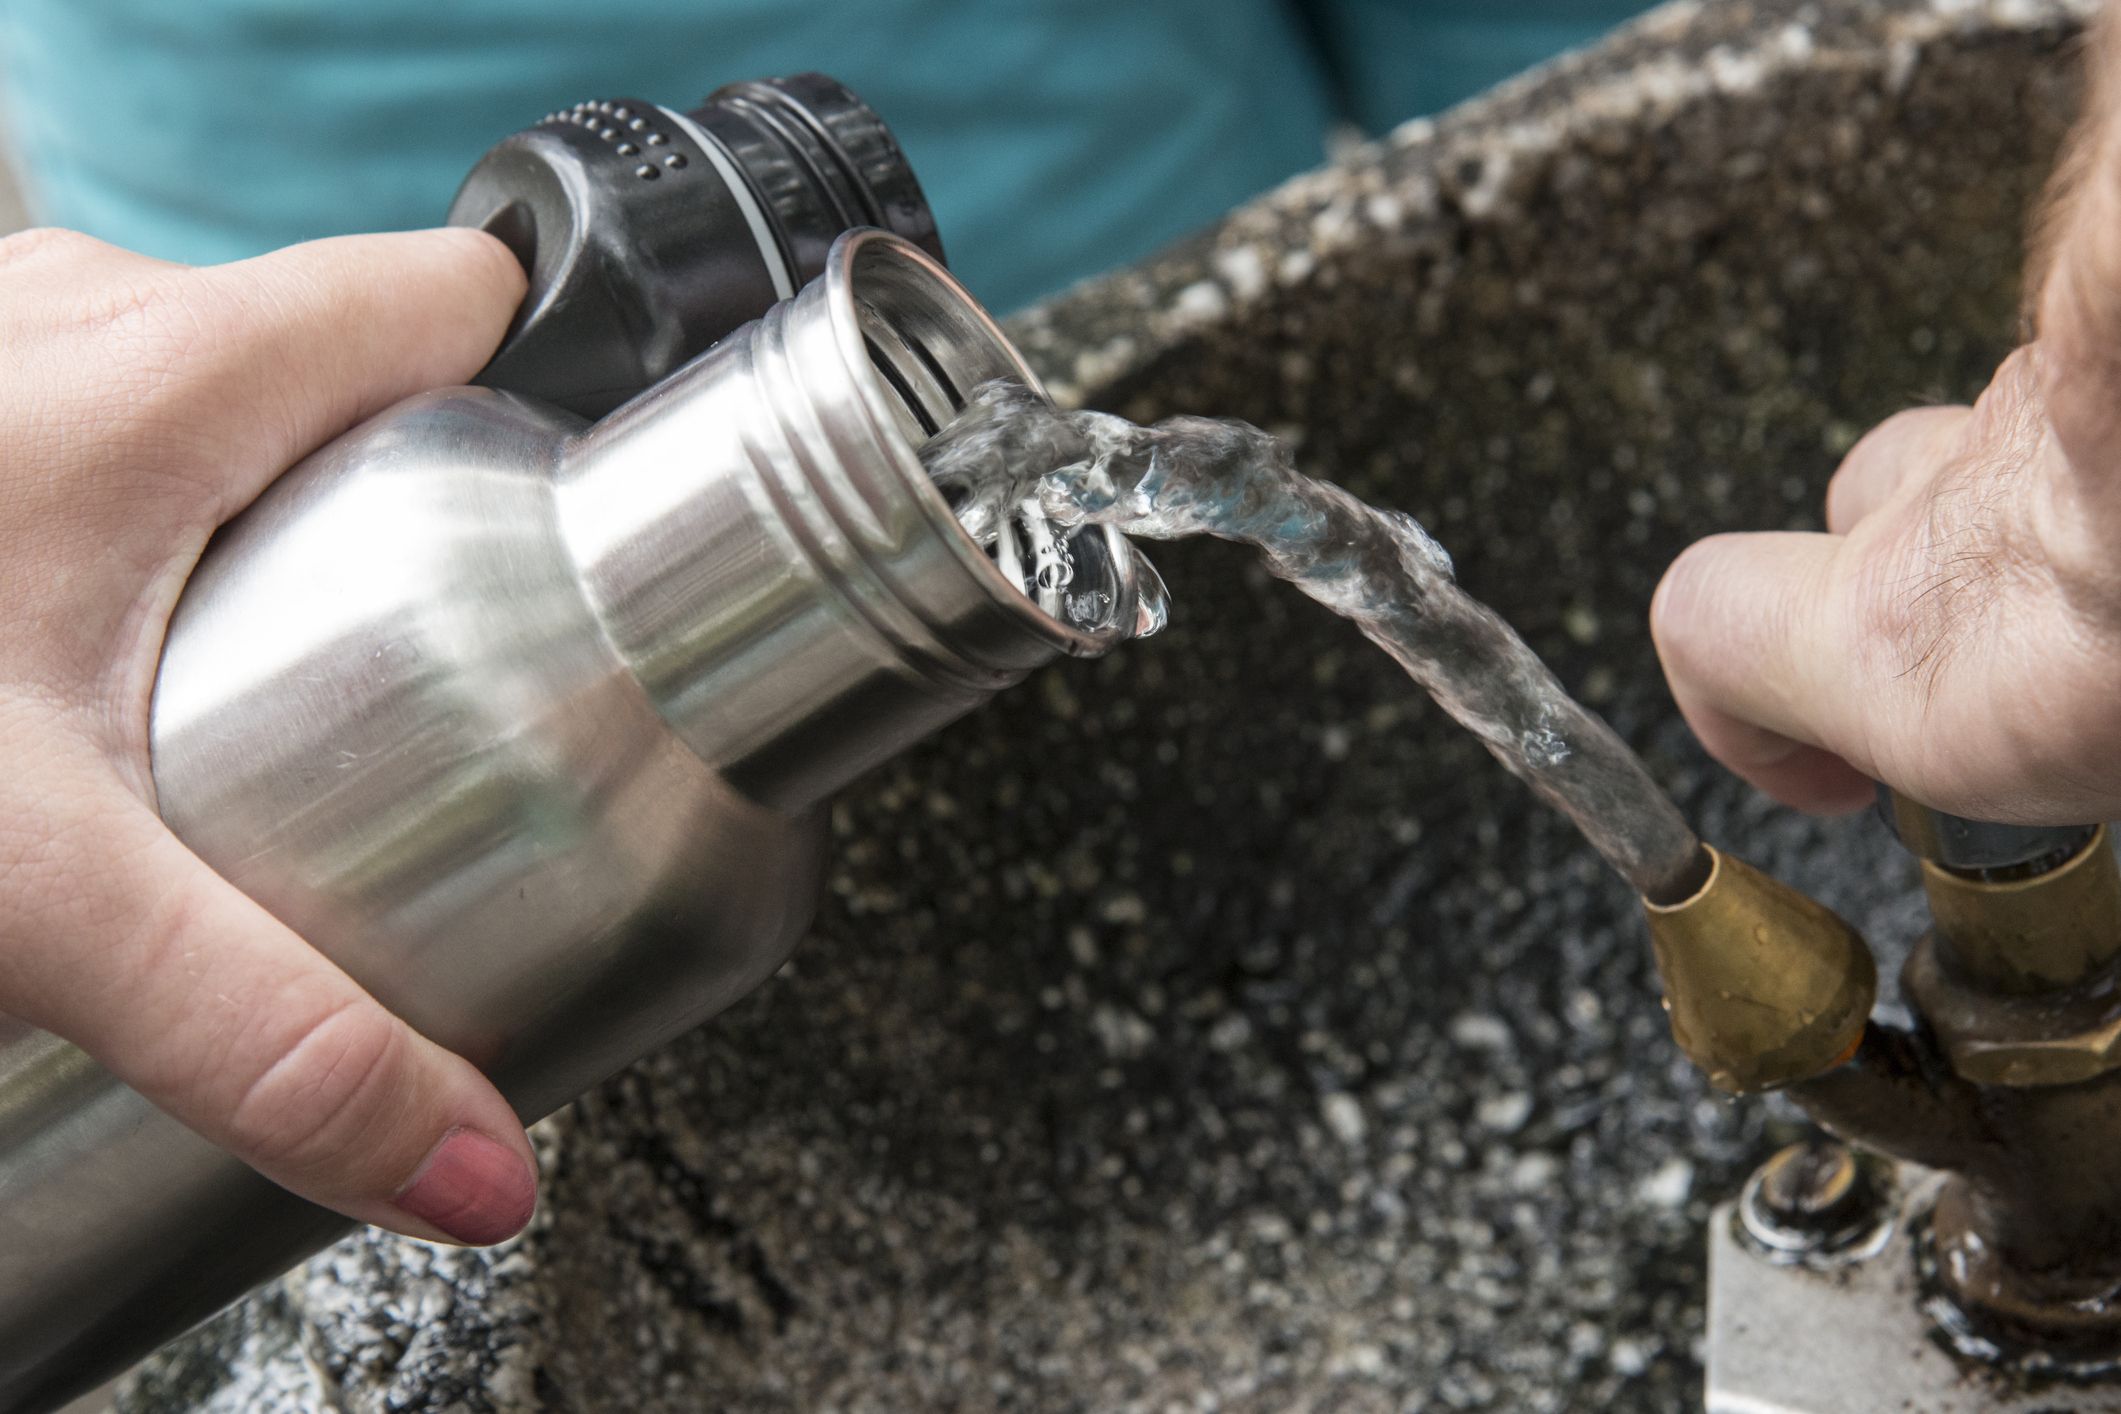 Are You Washing Your Water Bottle Enough? (Plus, 5 Tips for